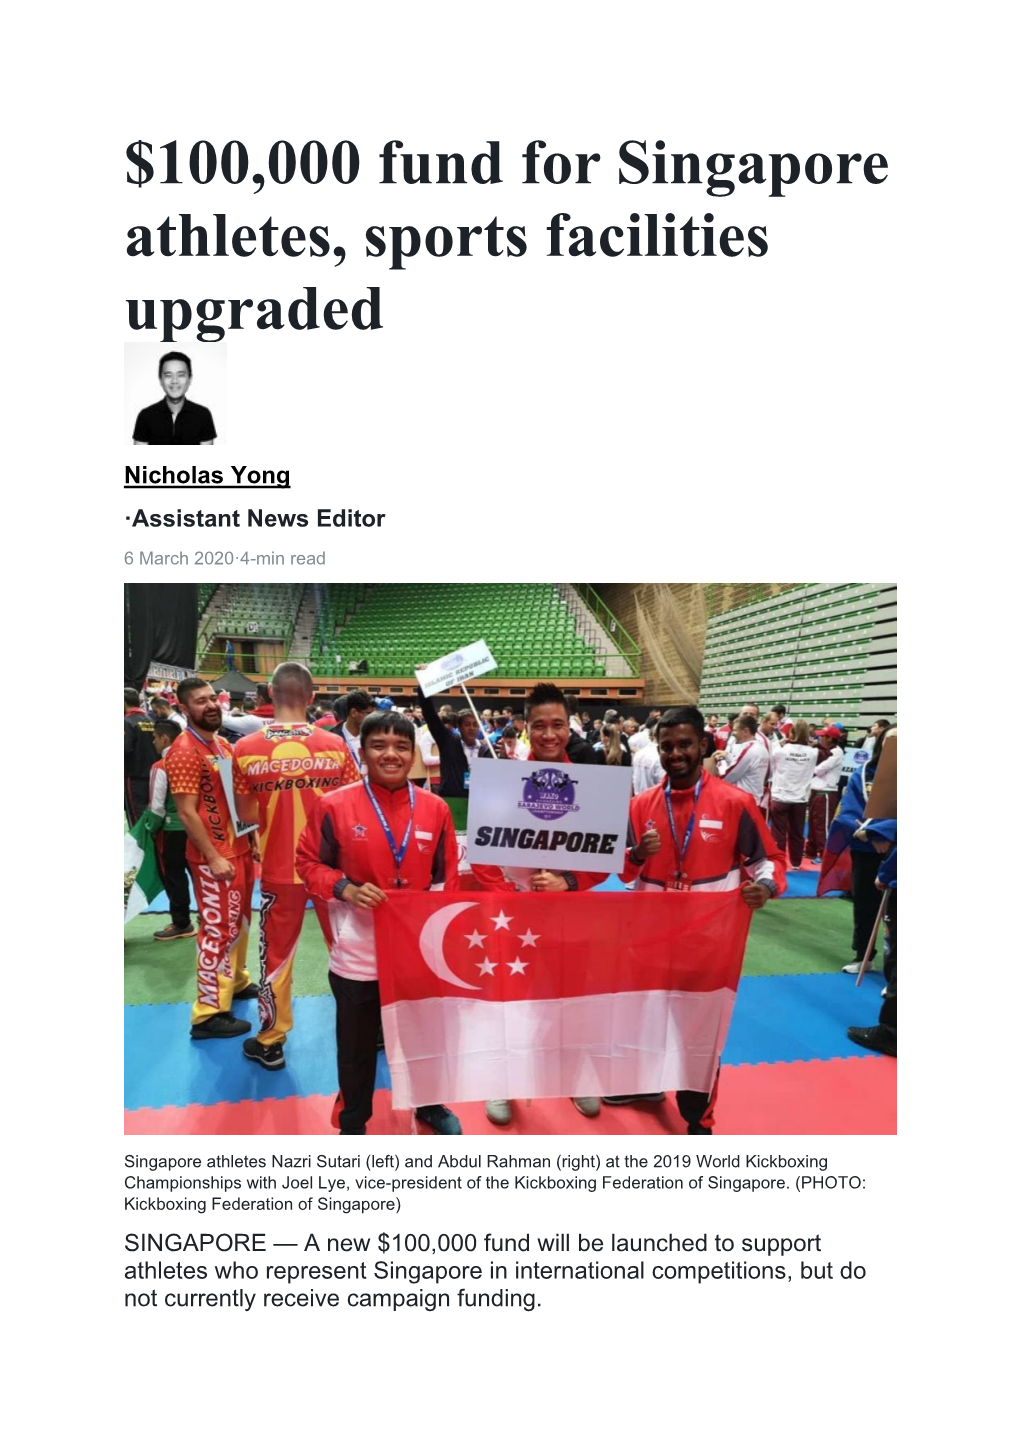 $100,000 Fund for Singapore Athletes, Sports Facilities Upgraded